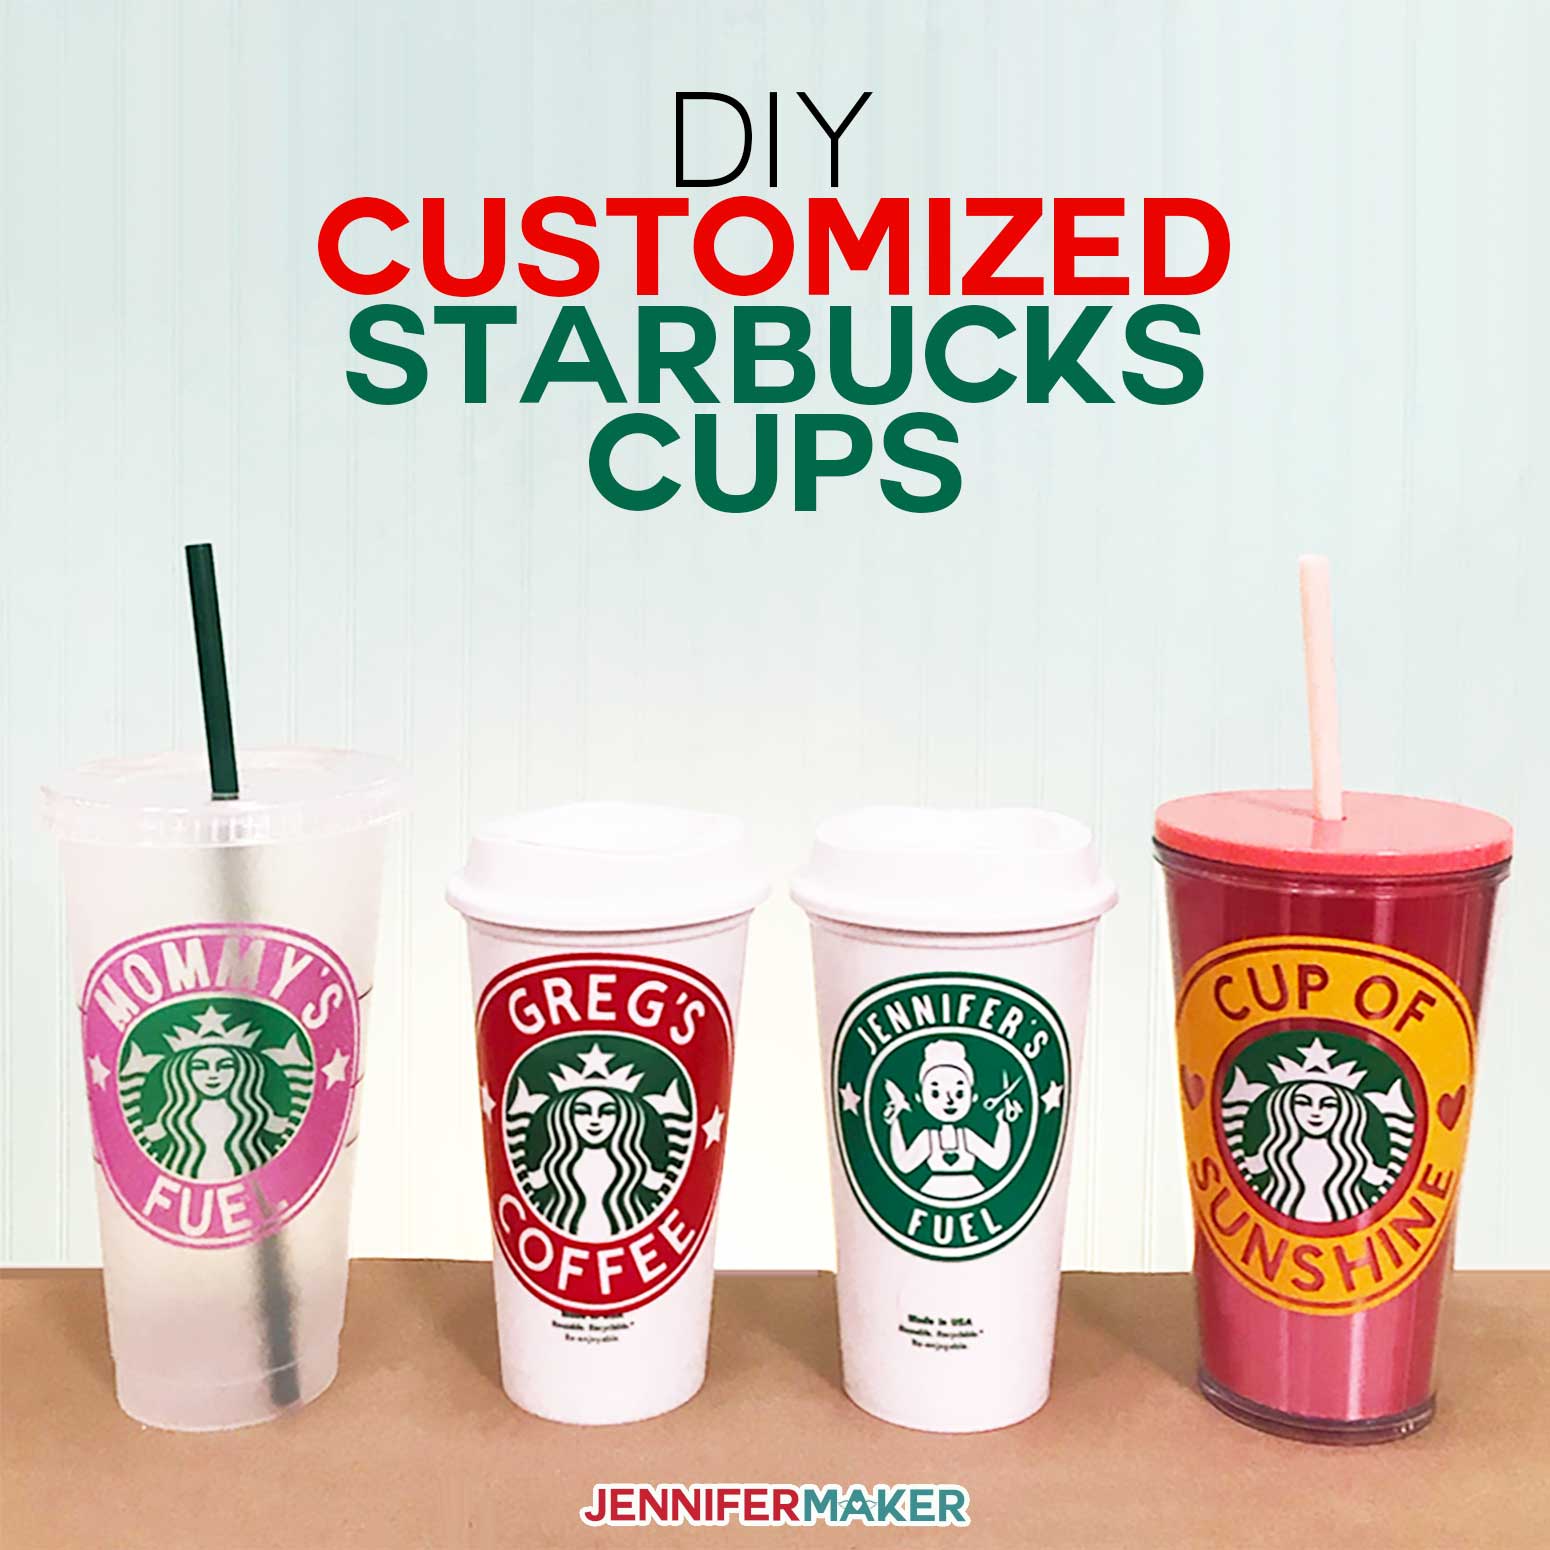 Diy Customized Starbucks Cups Personalize With A Name Jennifer Maker,Log Cabin Quilt Patterns Free Printable